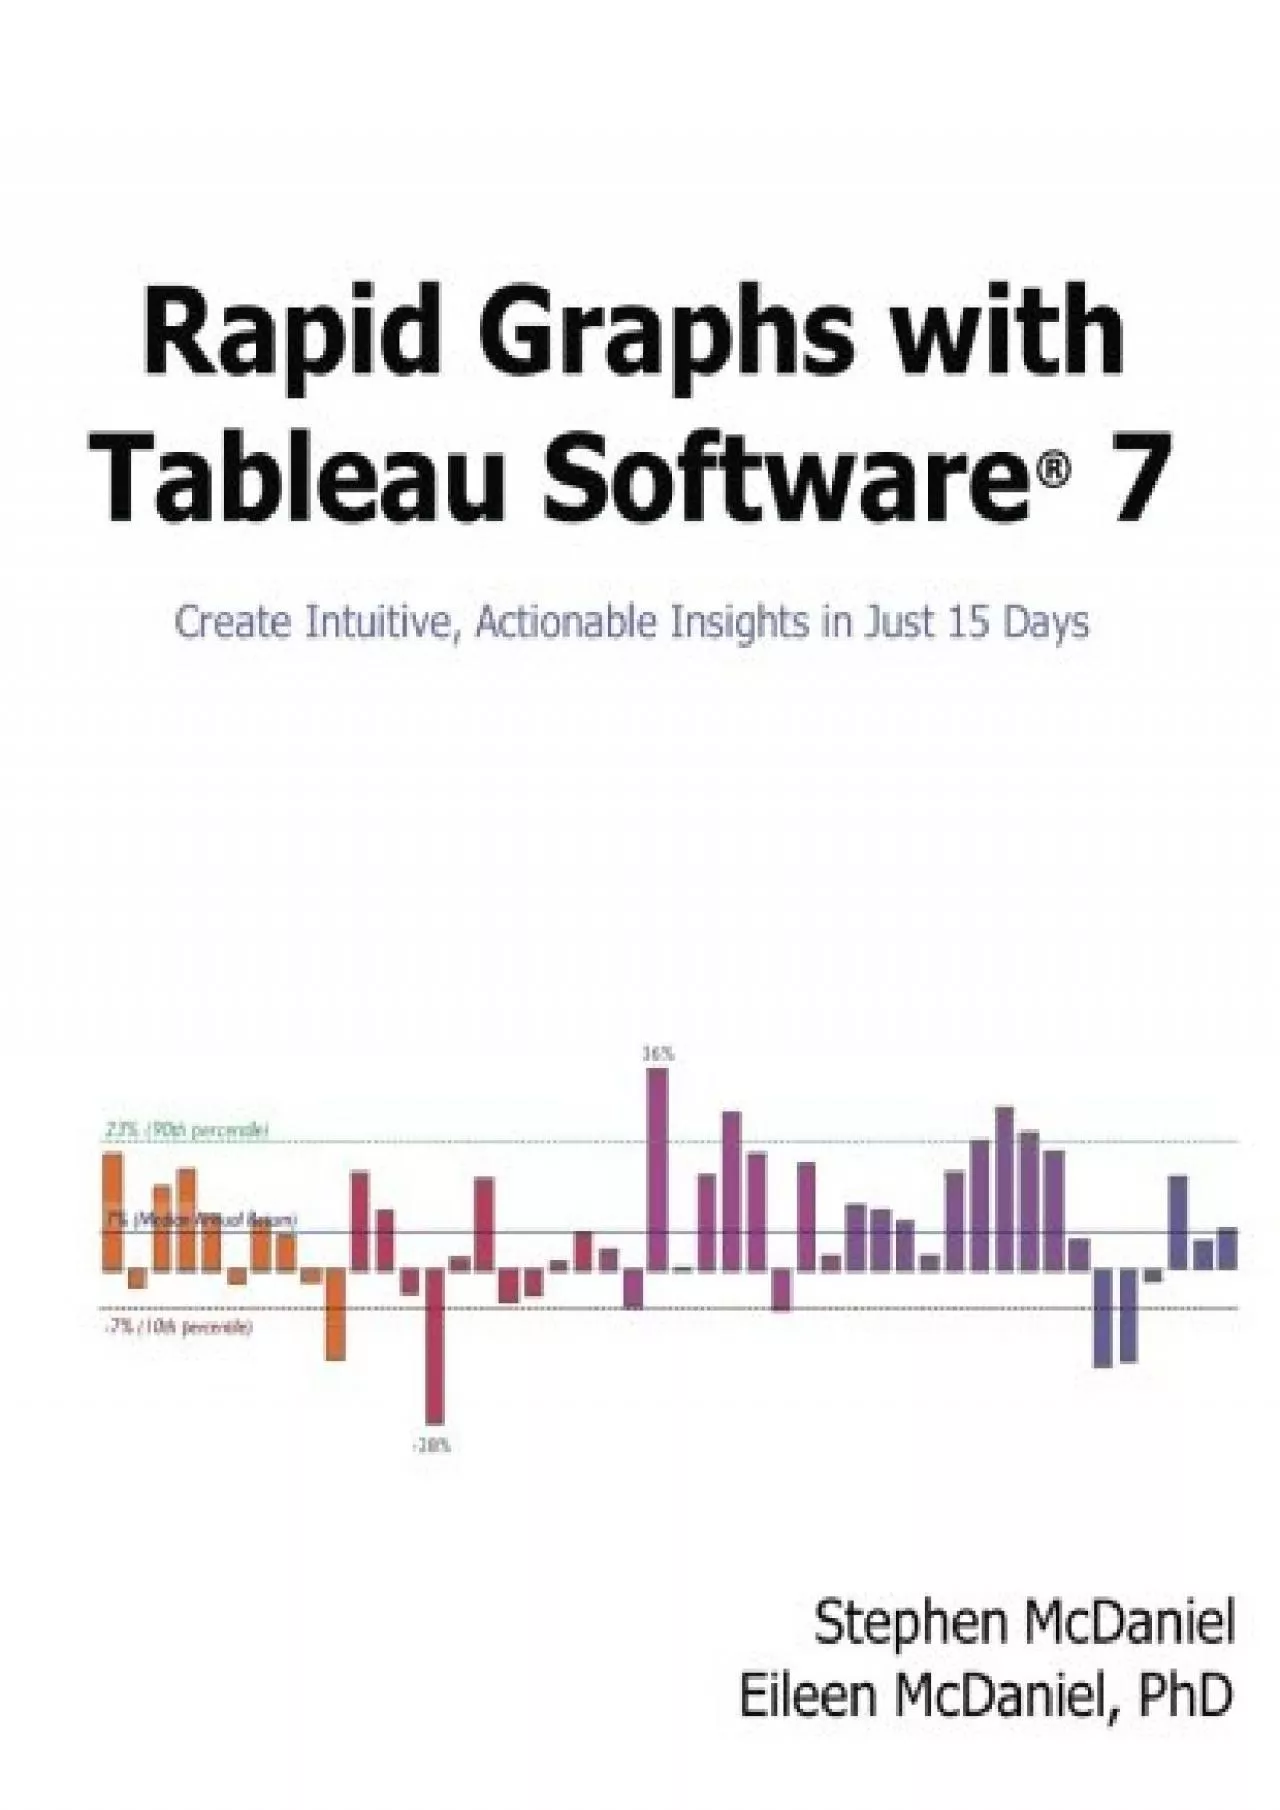 Rapid Graphs with Tableau Software 7: Create Intuitive, Actionable Insights in Just 15